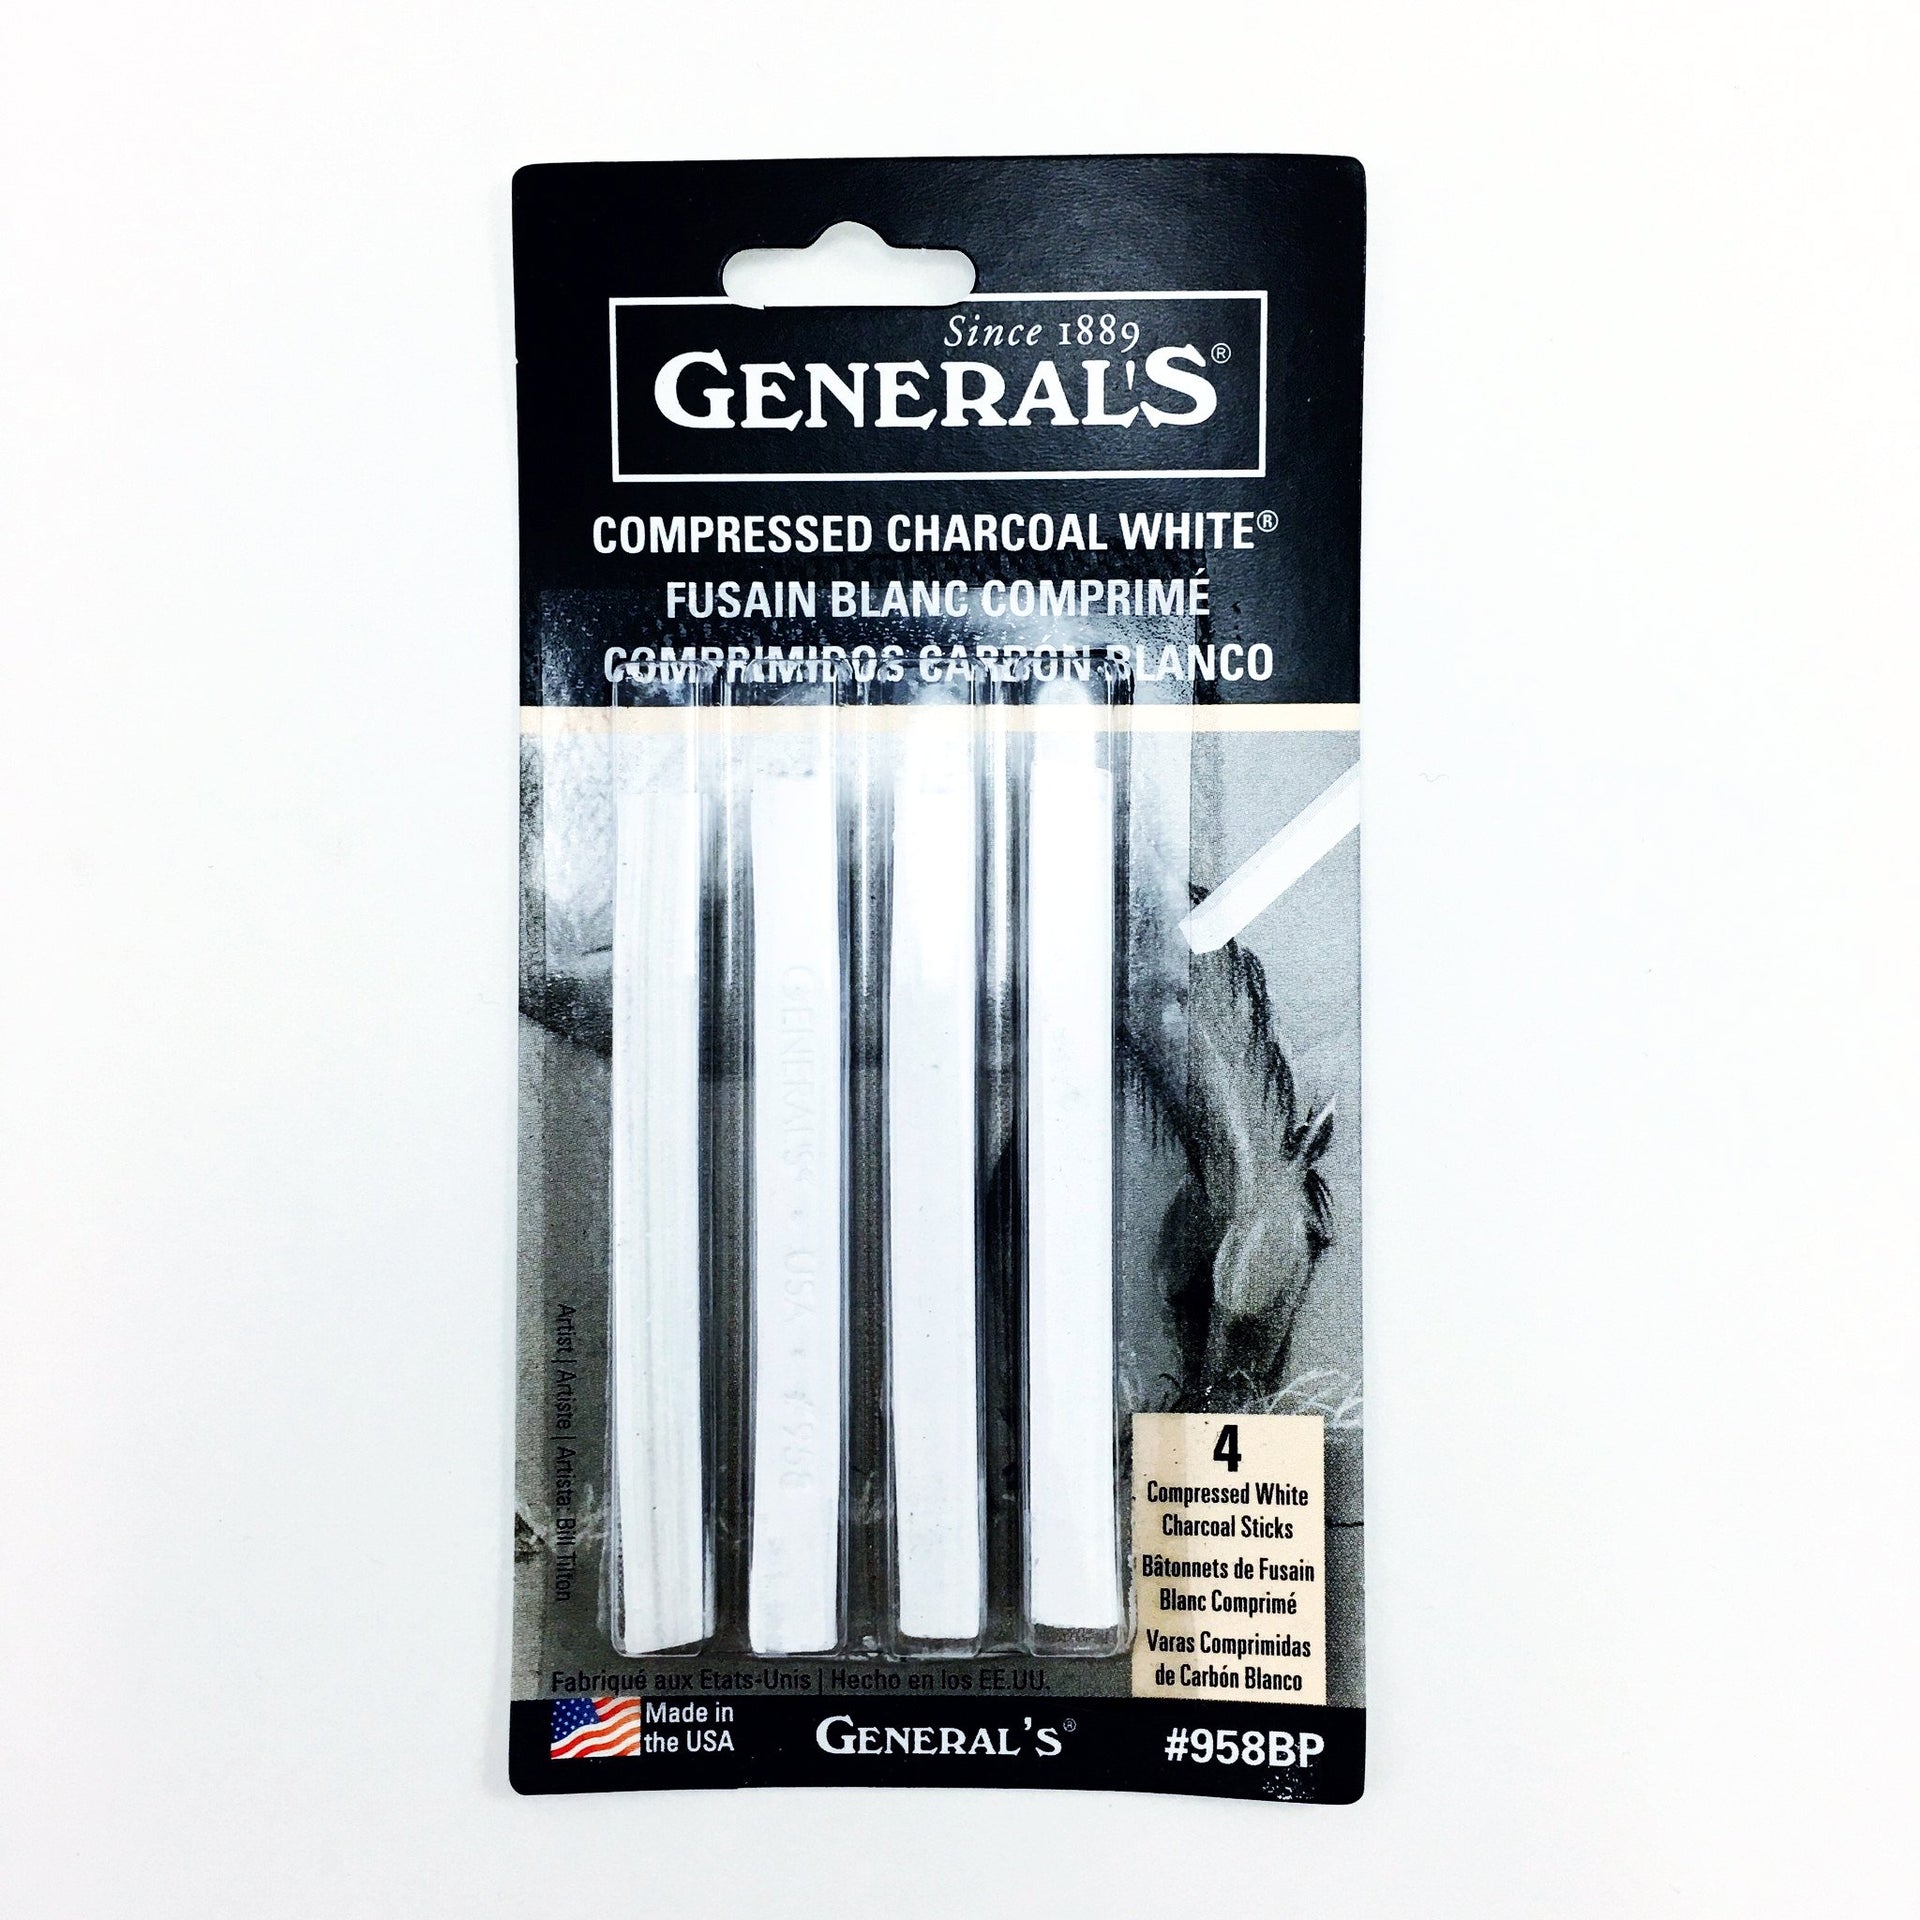 General's Compressed Charcoal - Box of 6 Rectangular Sticks